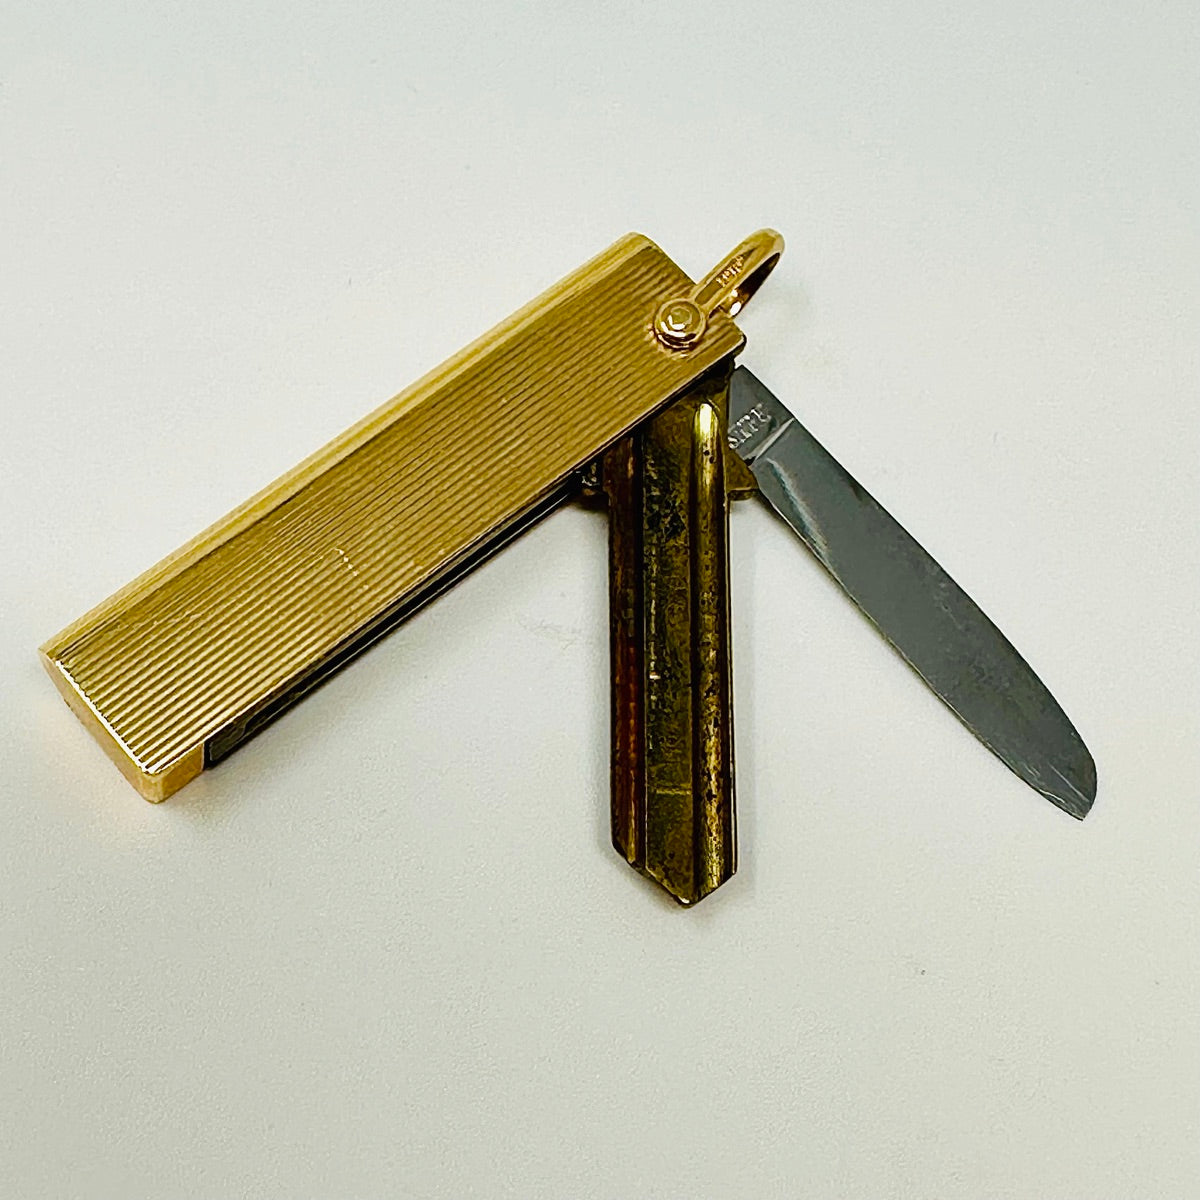 Louis Tamis 14K Gold Knife and Key